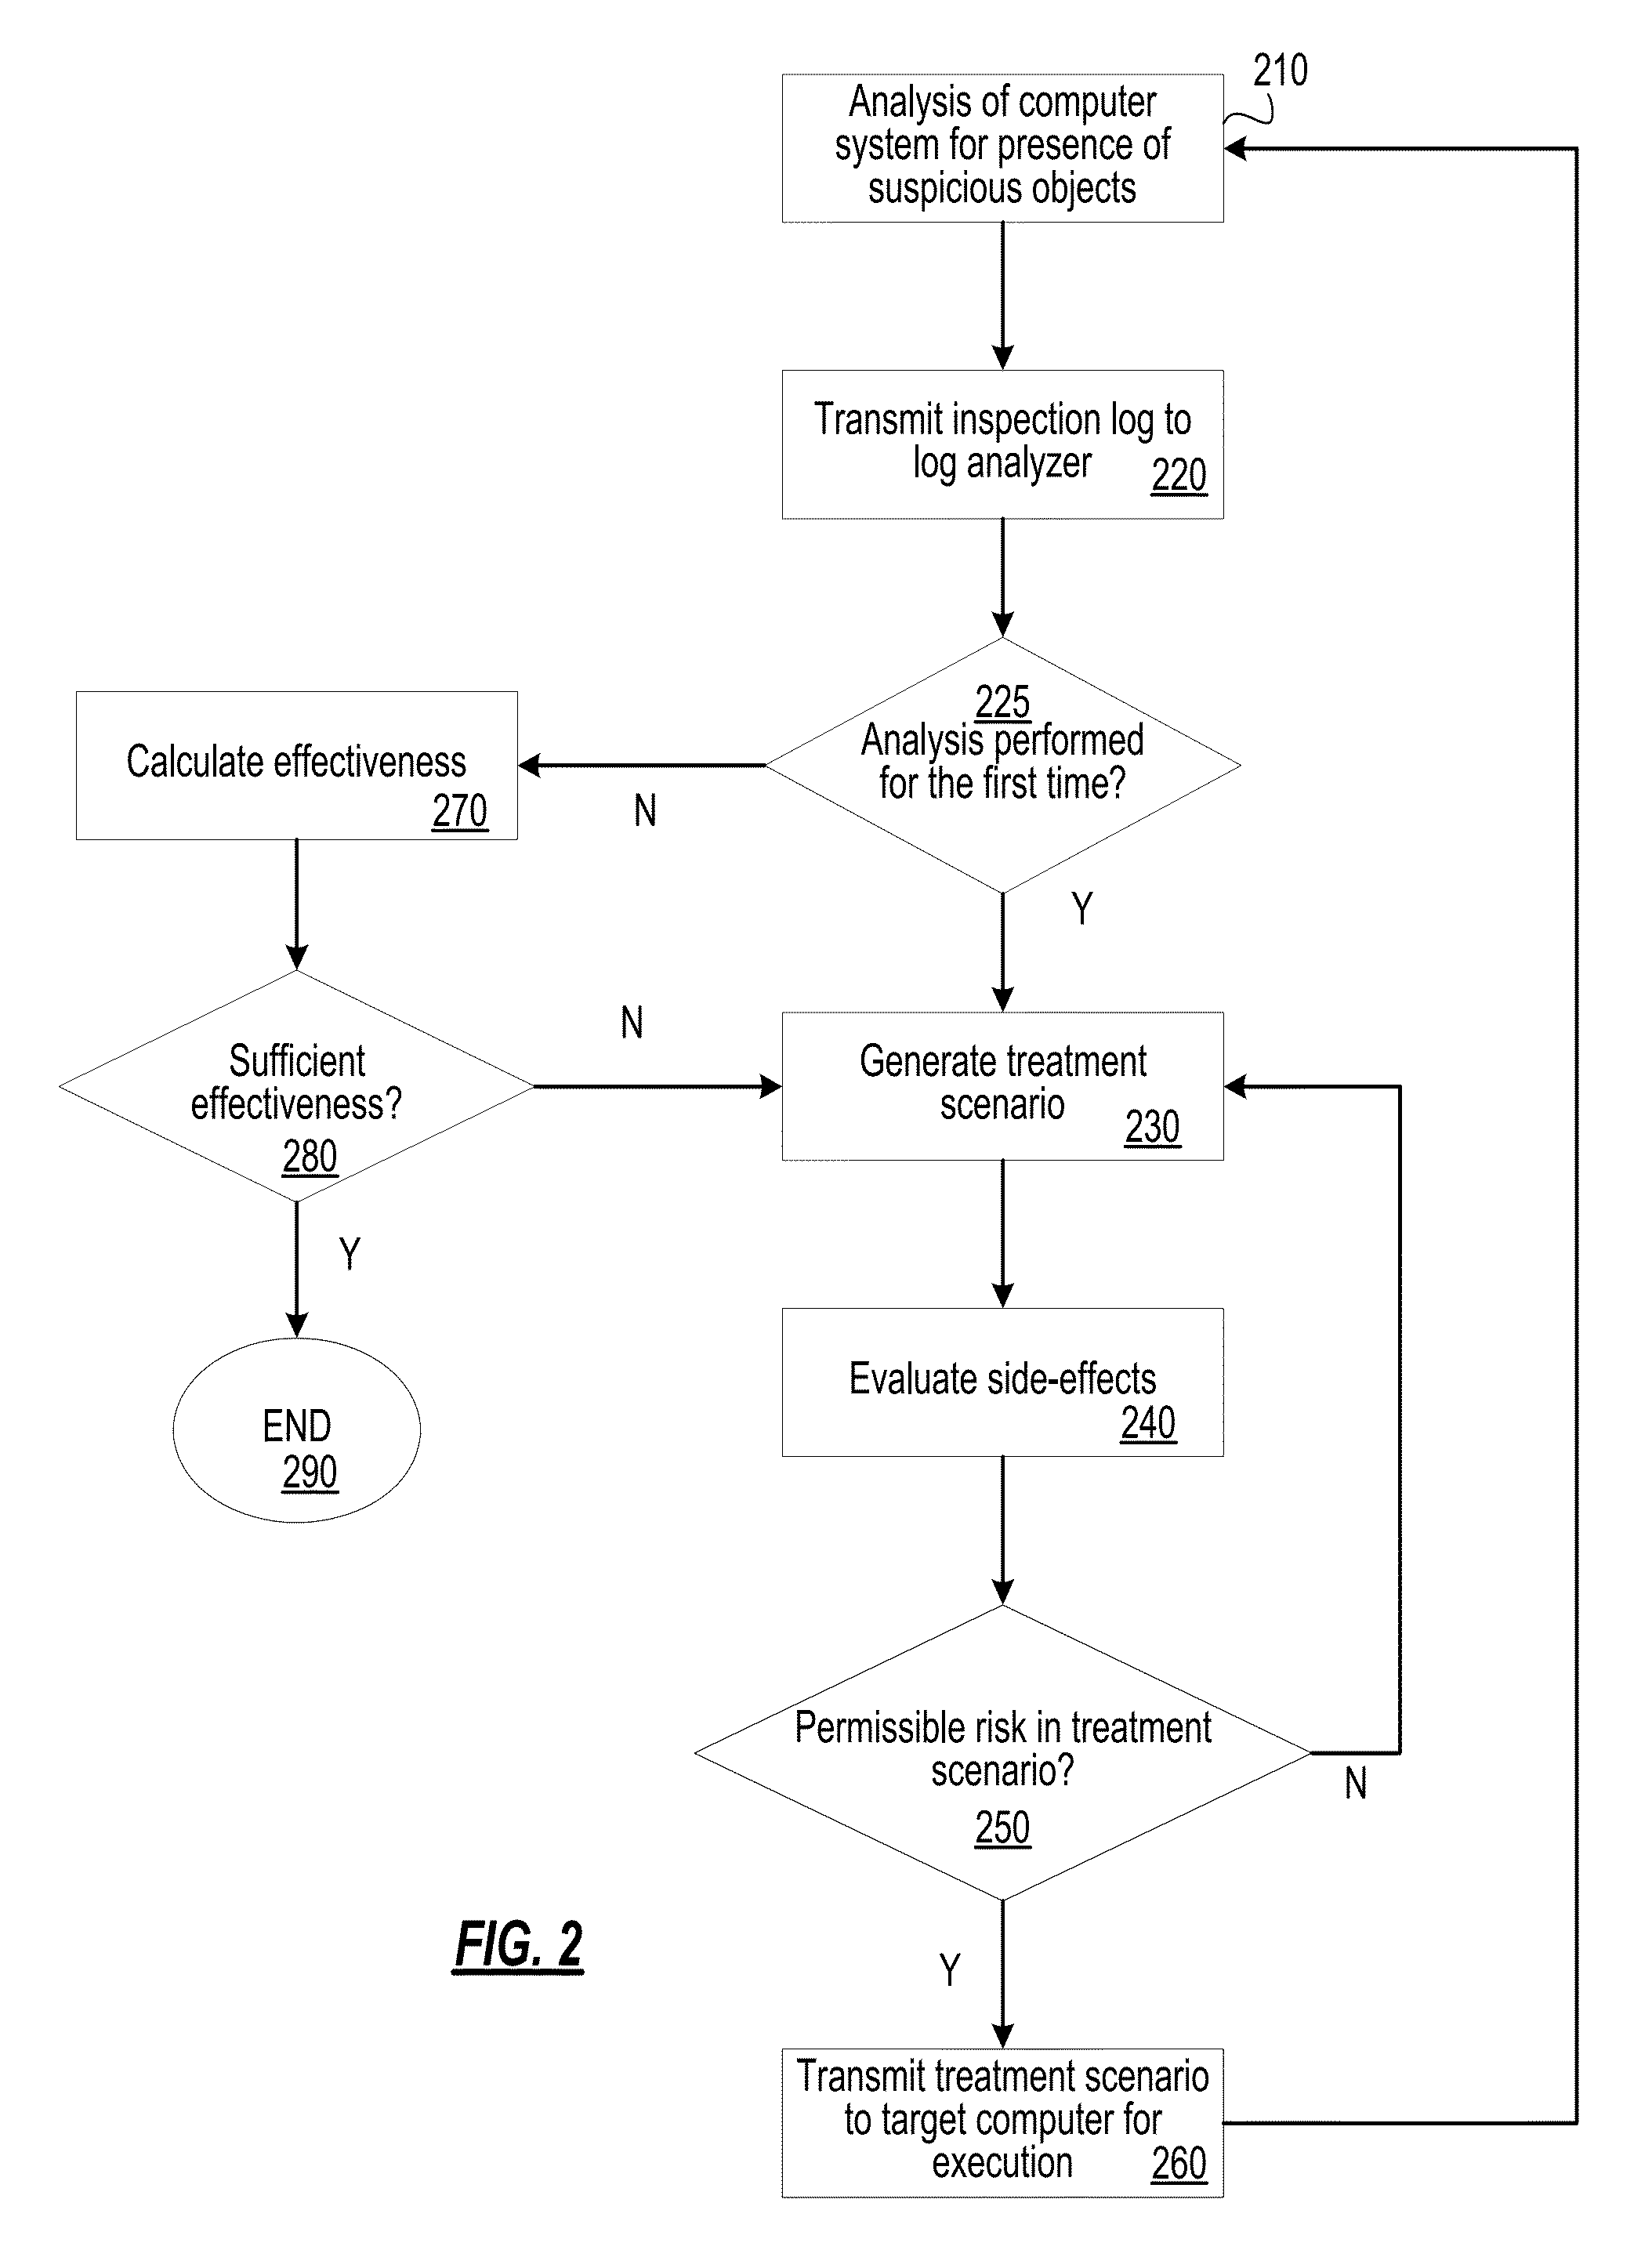 System and method for removal of malicious software from computer systems and management of treatment side-effects